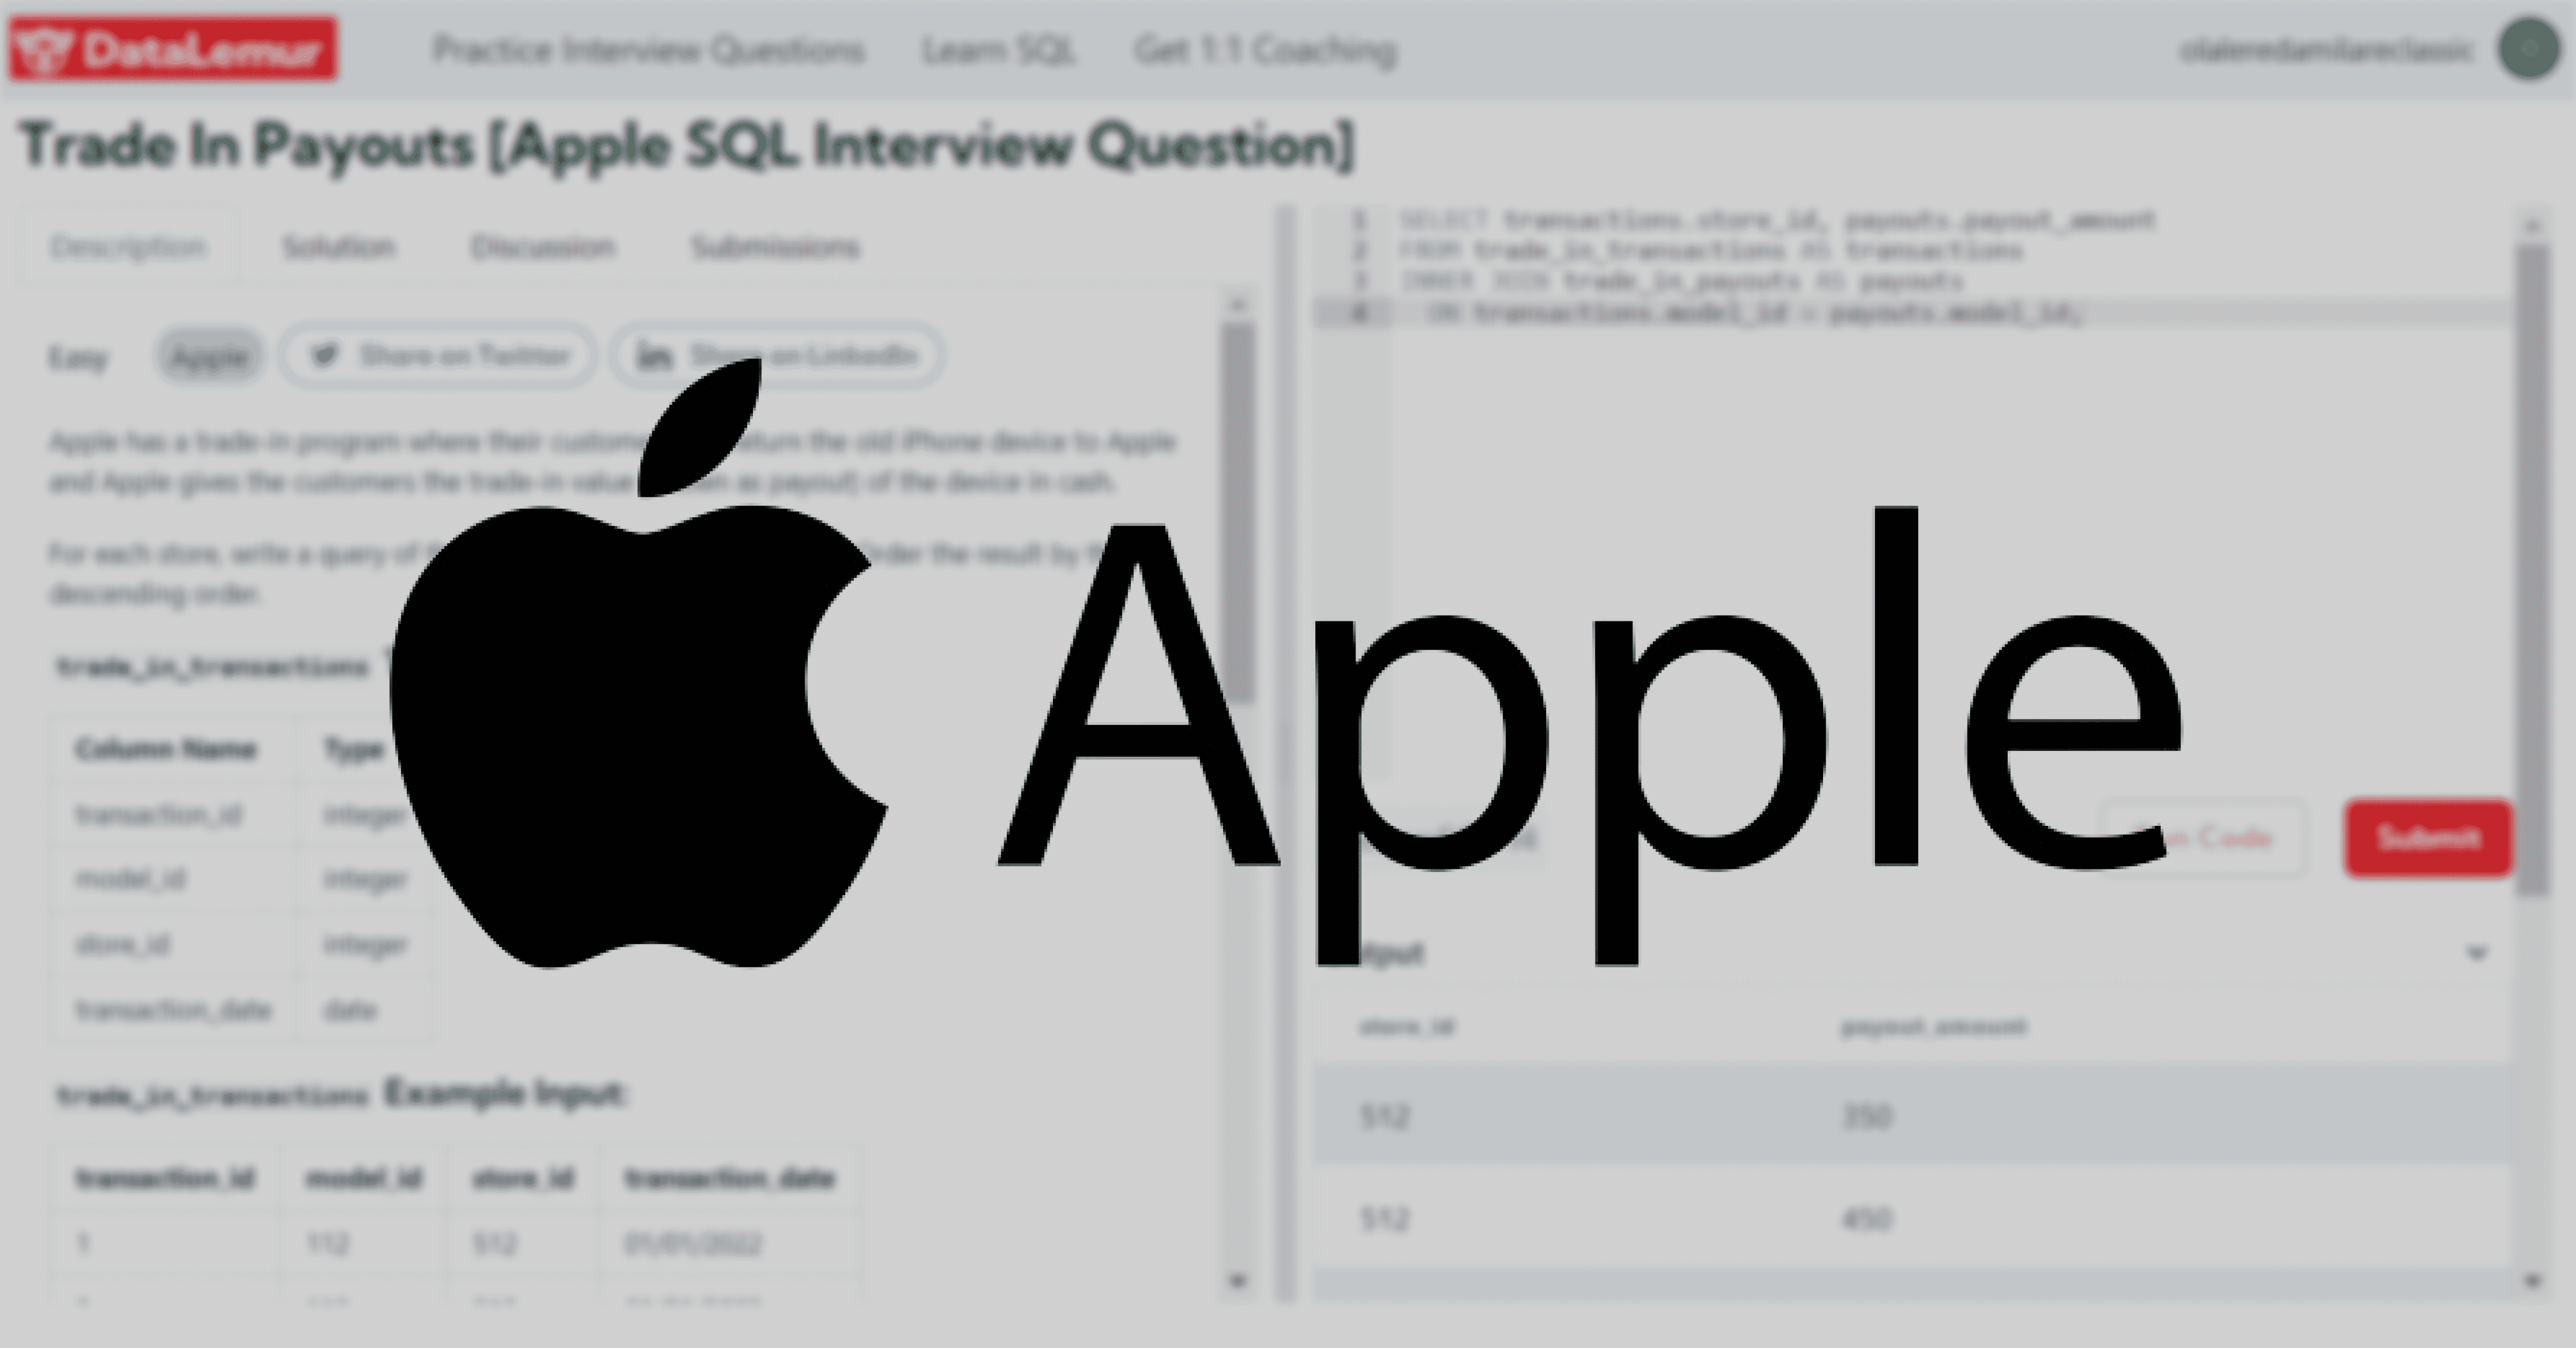 Apple SQL Interview Question Trade-In Payouts